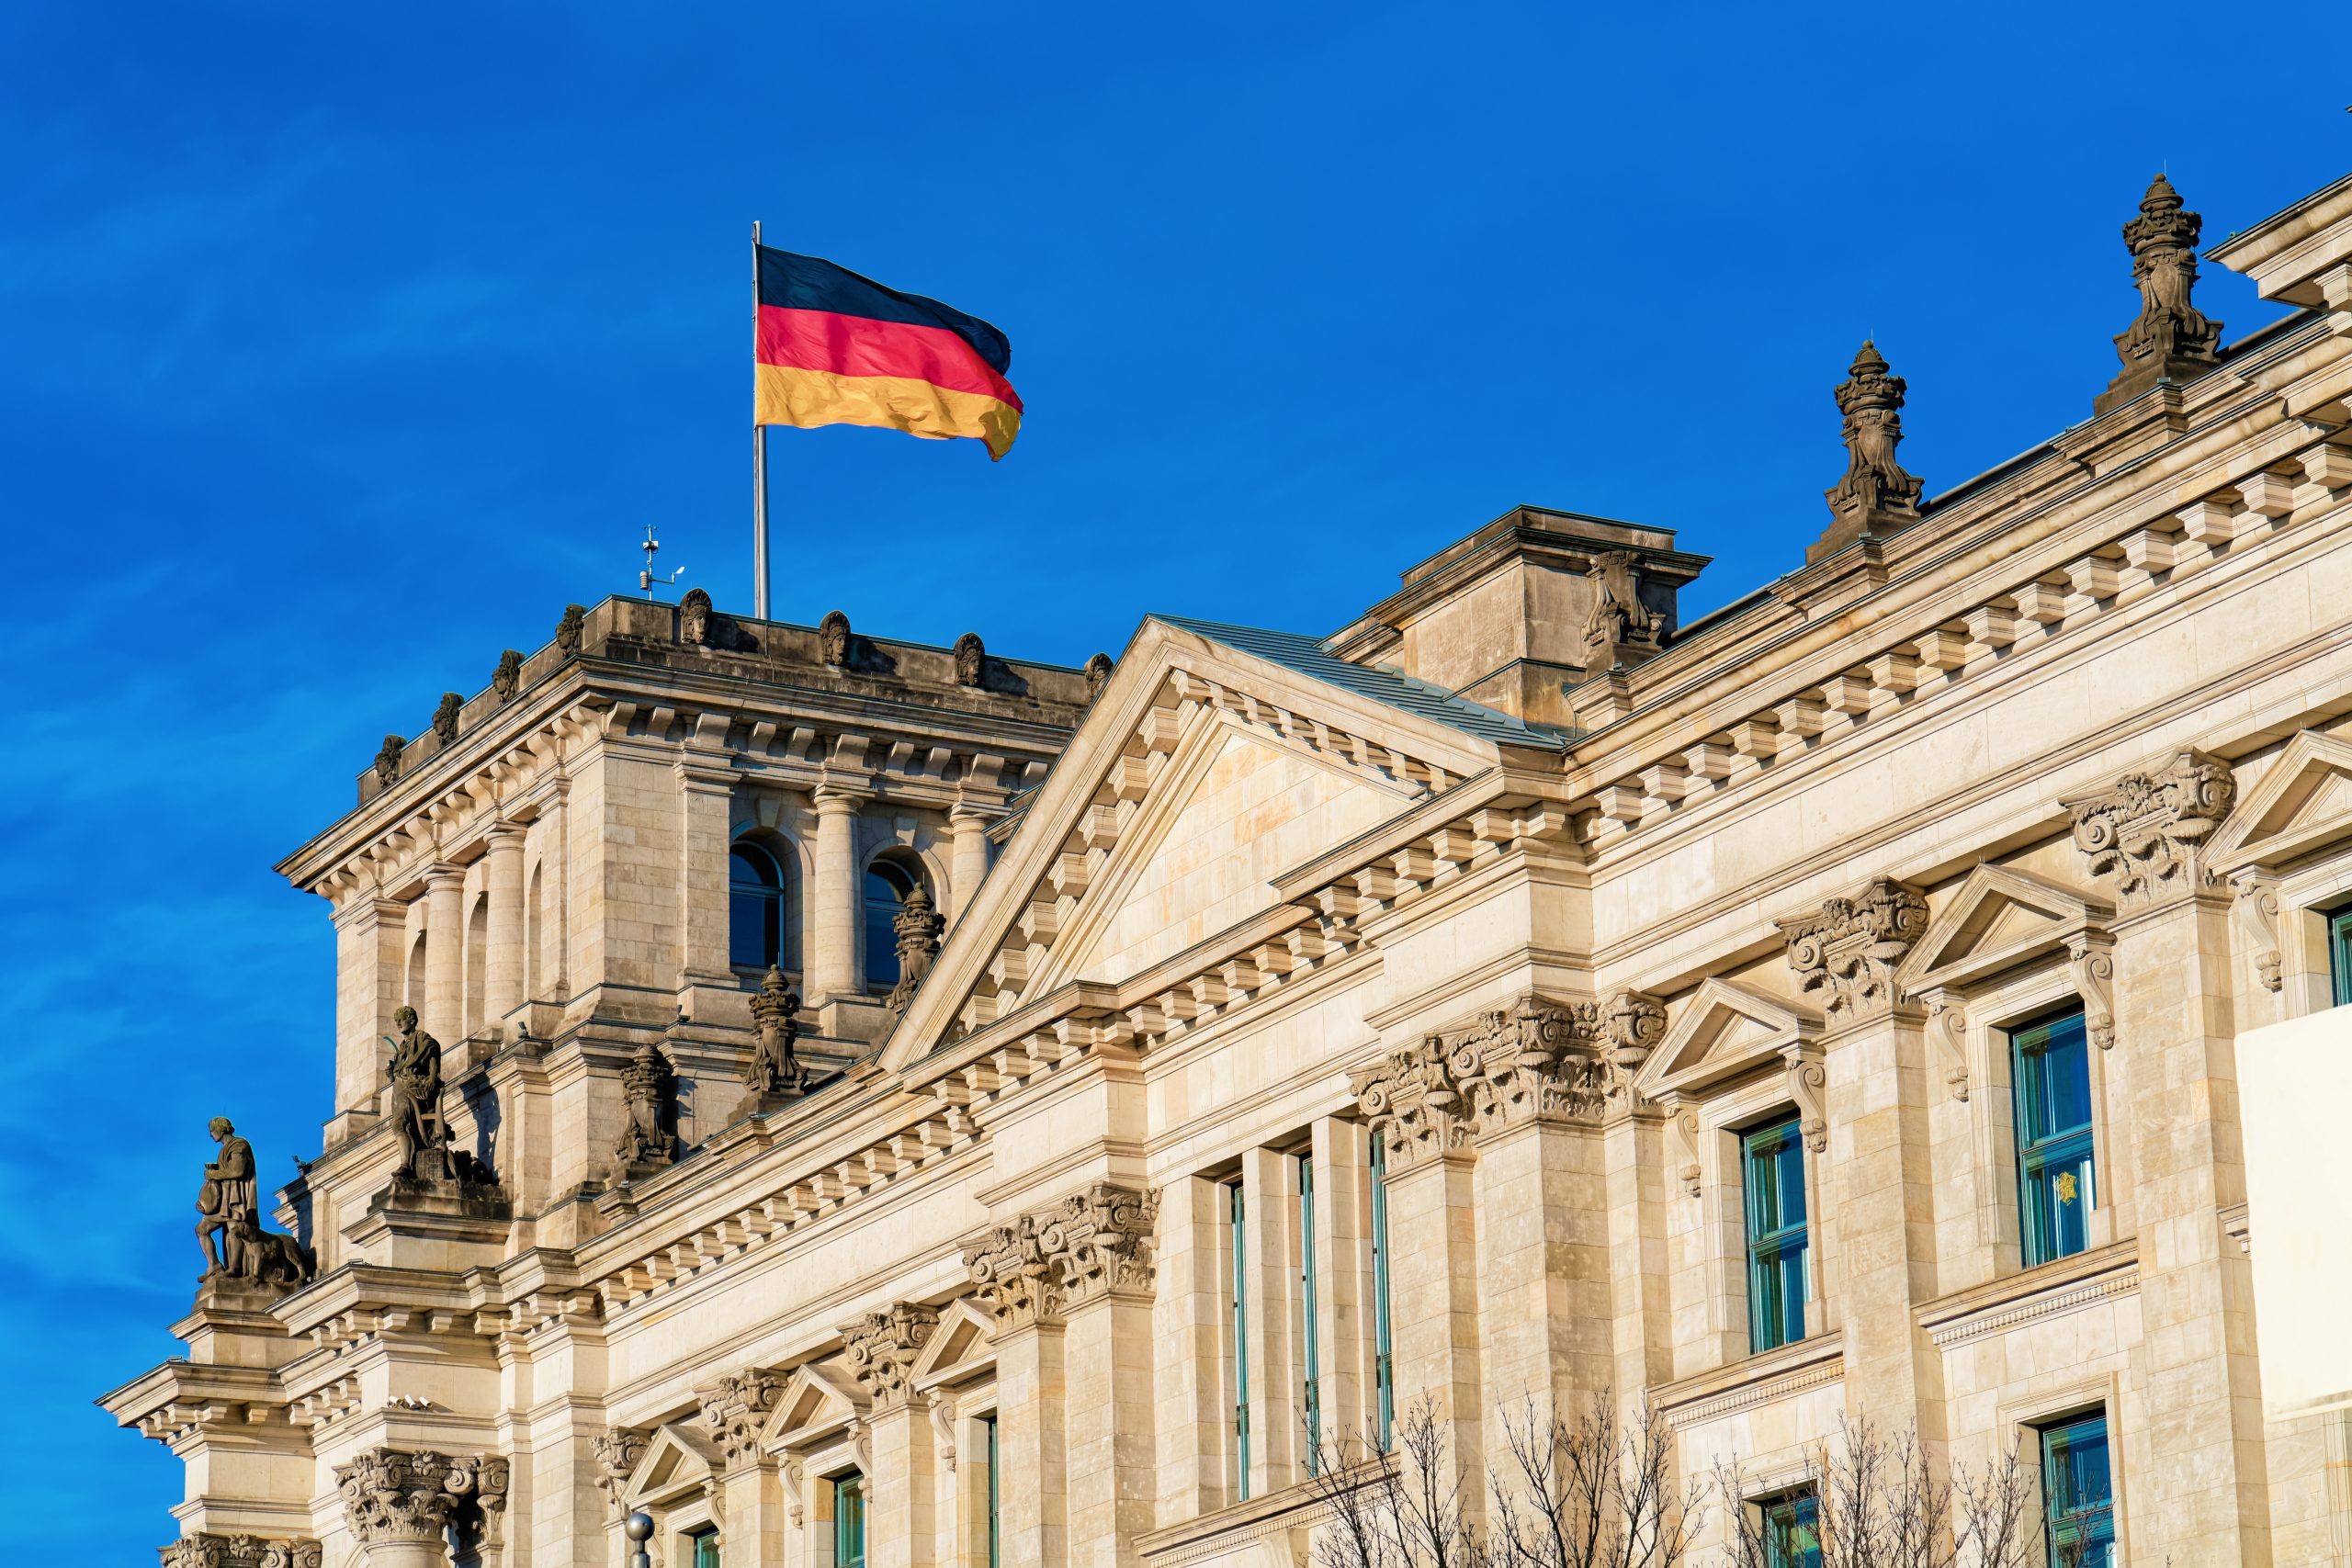 Germany: Coalition agreed on implementation of EU whistleblower protection directive